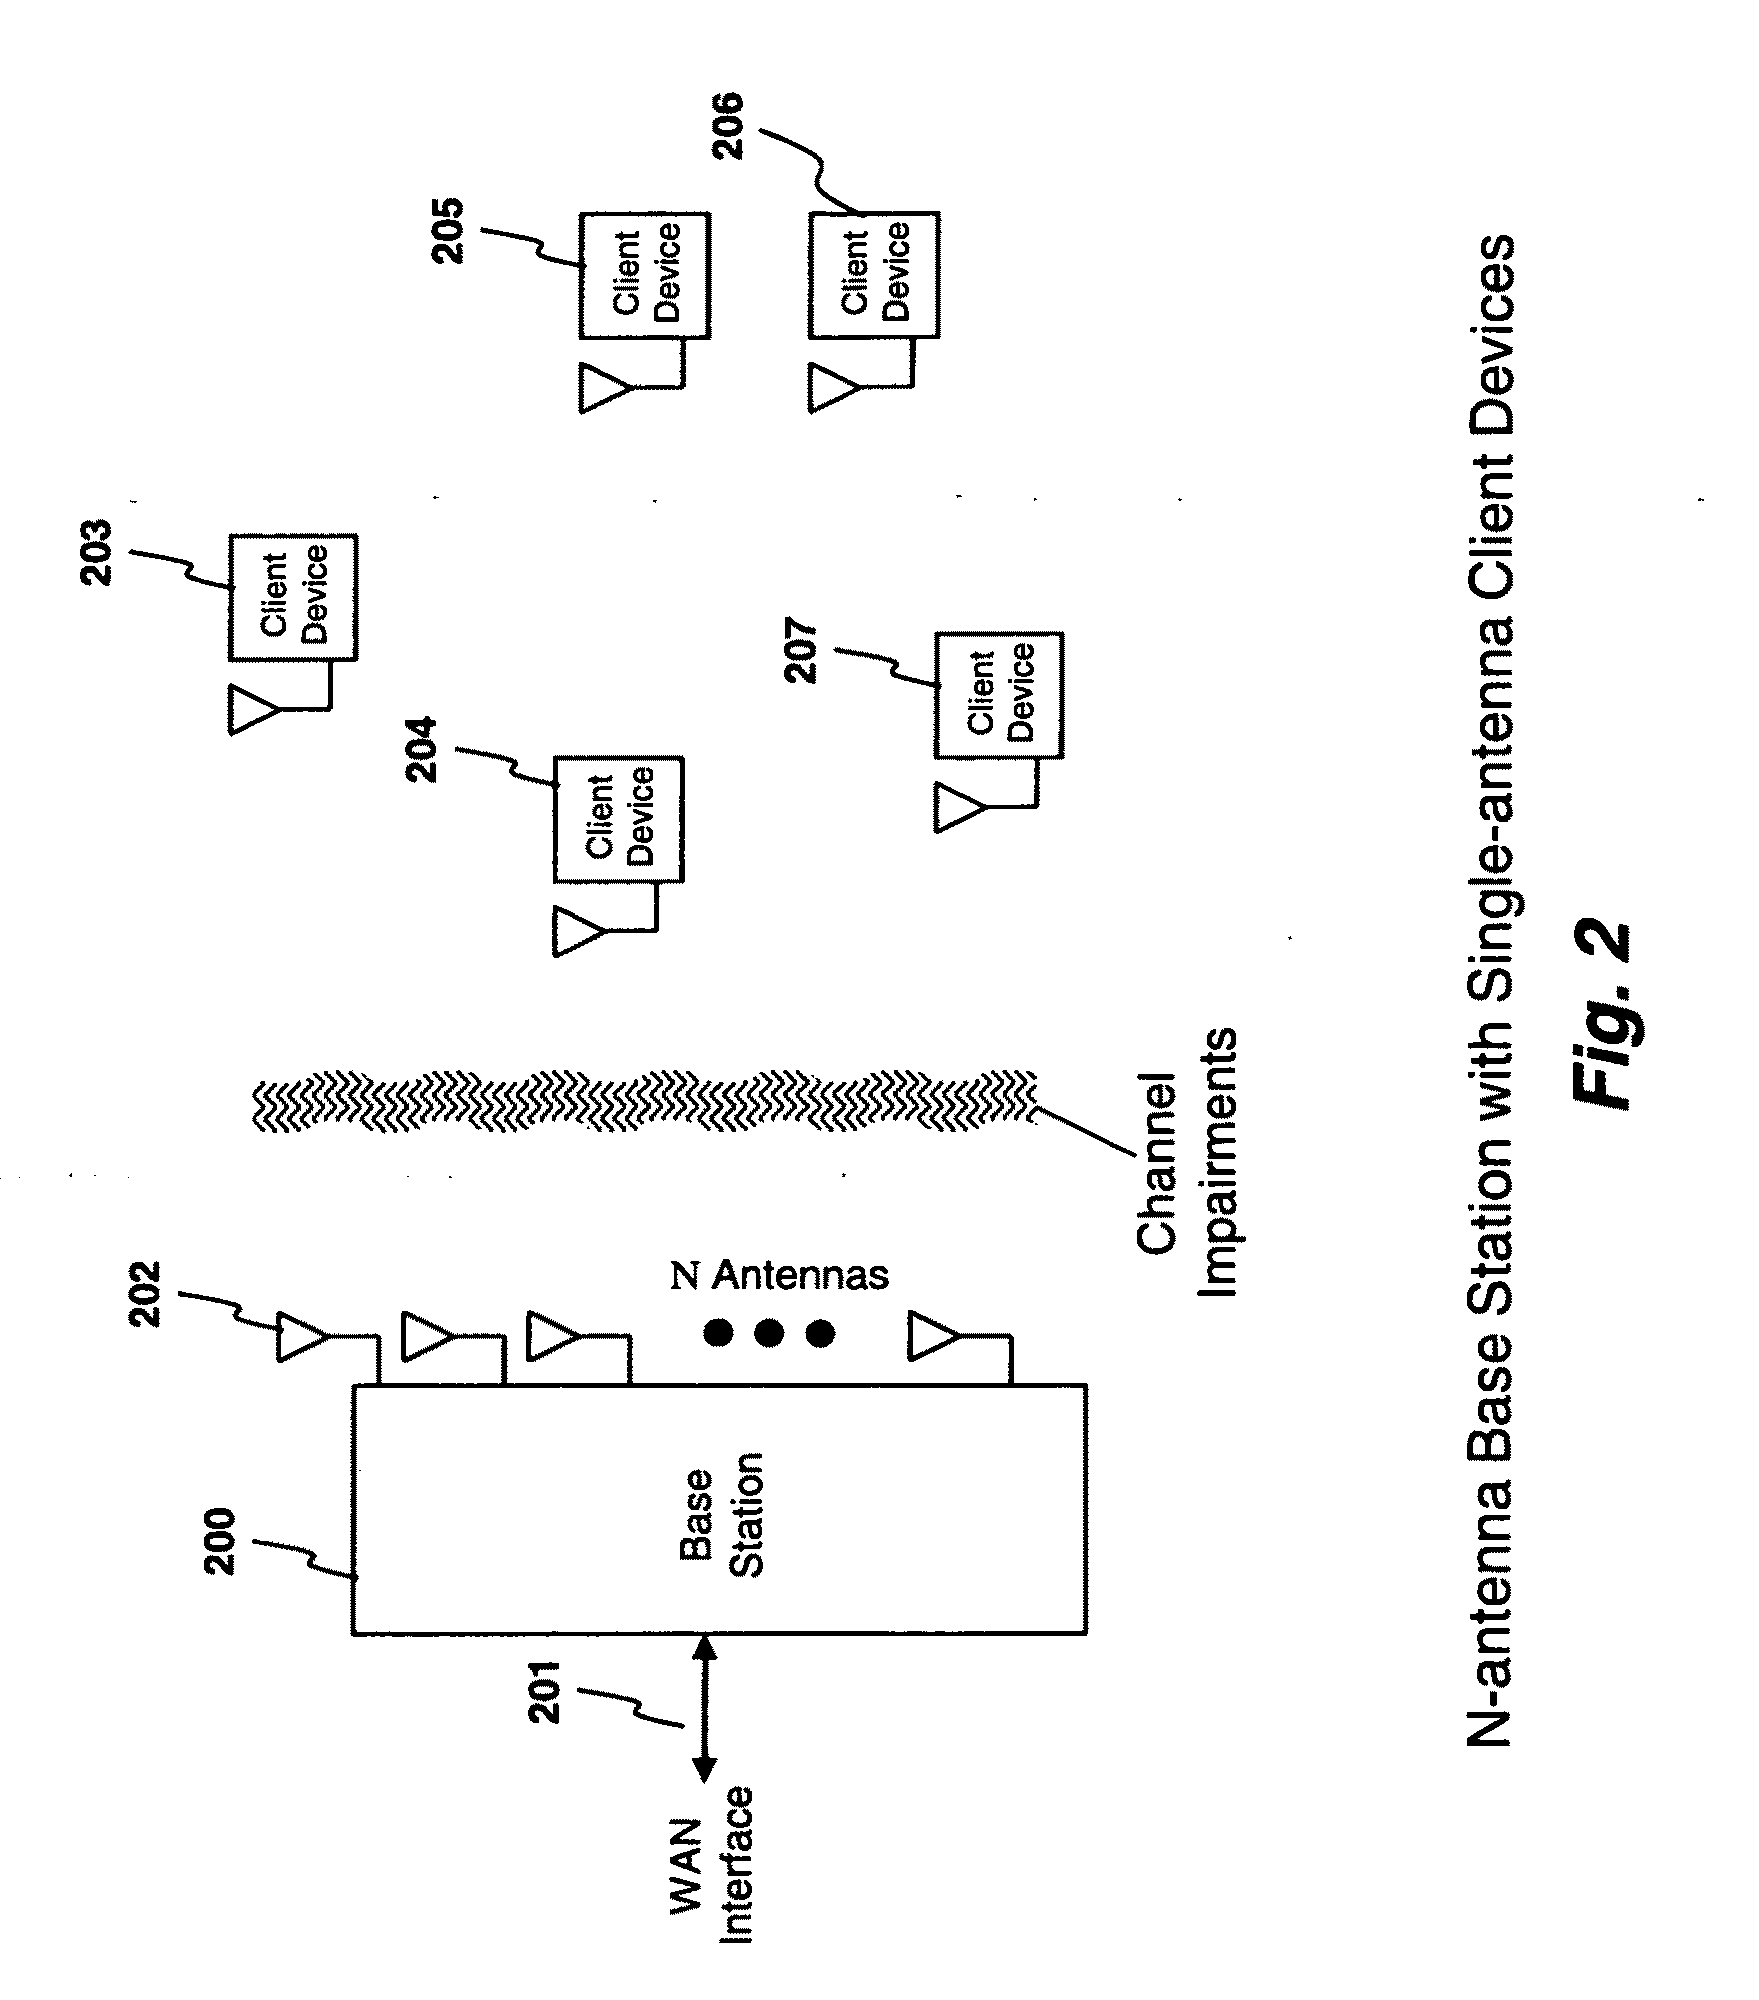 System and method for DIDO precoding interpolation in multicarrier systems